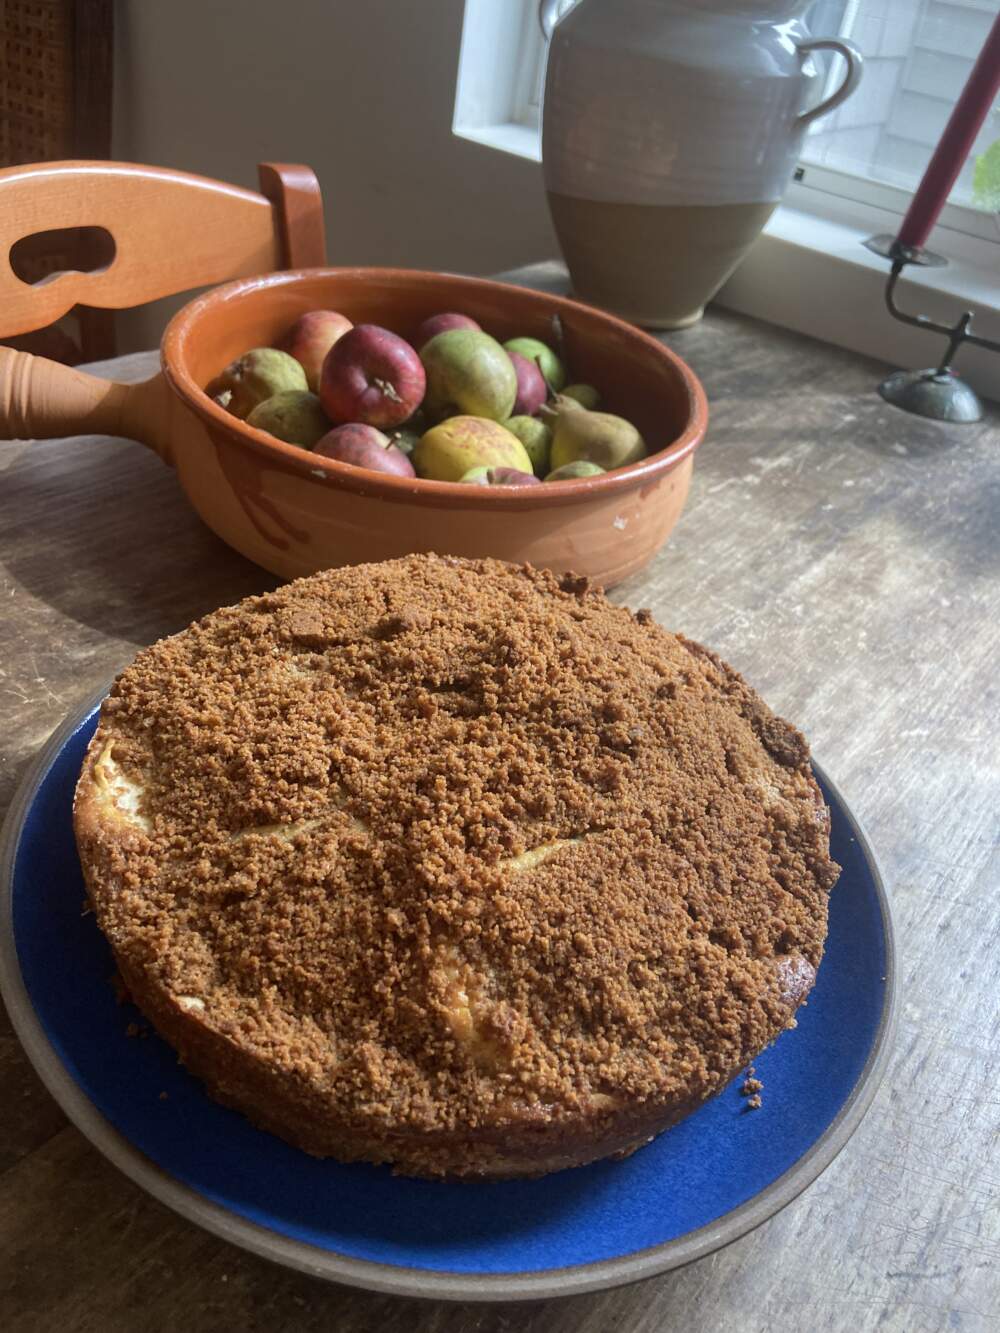 Apple sour cream coffee cake with gingersnap topping. (Kathy Gunst/Here & Now)